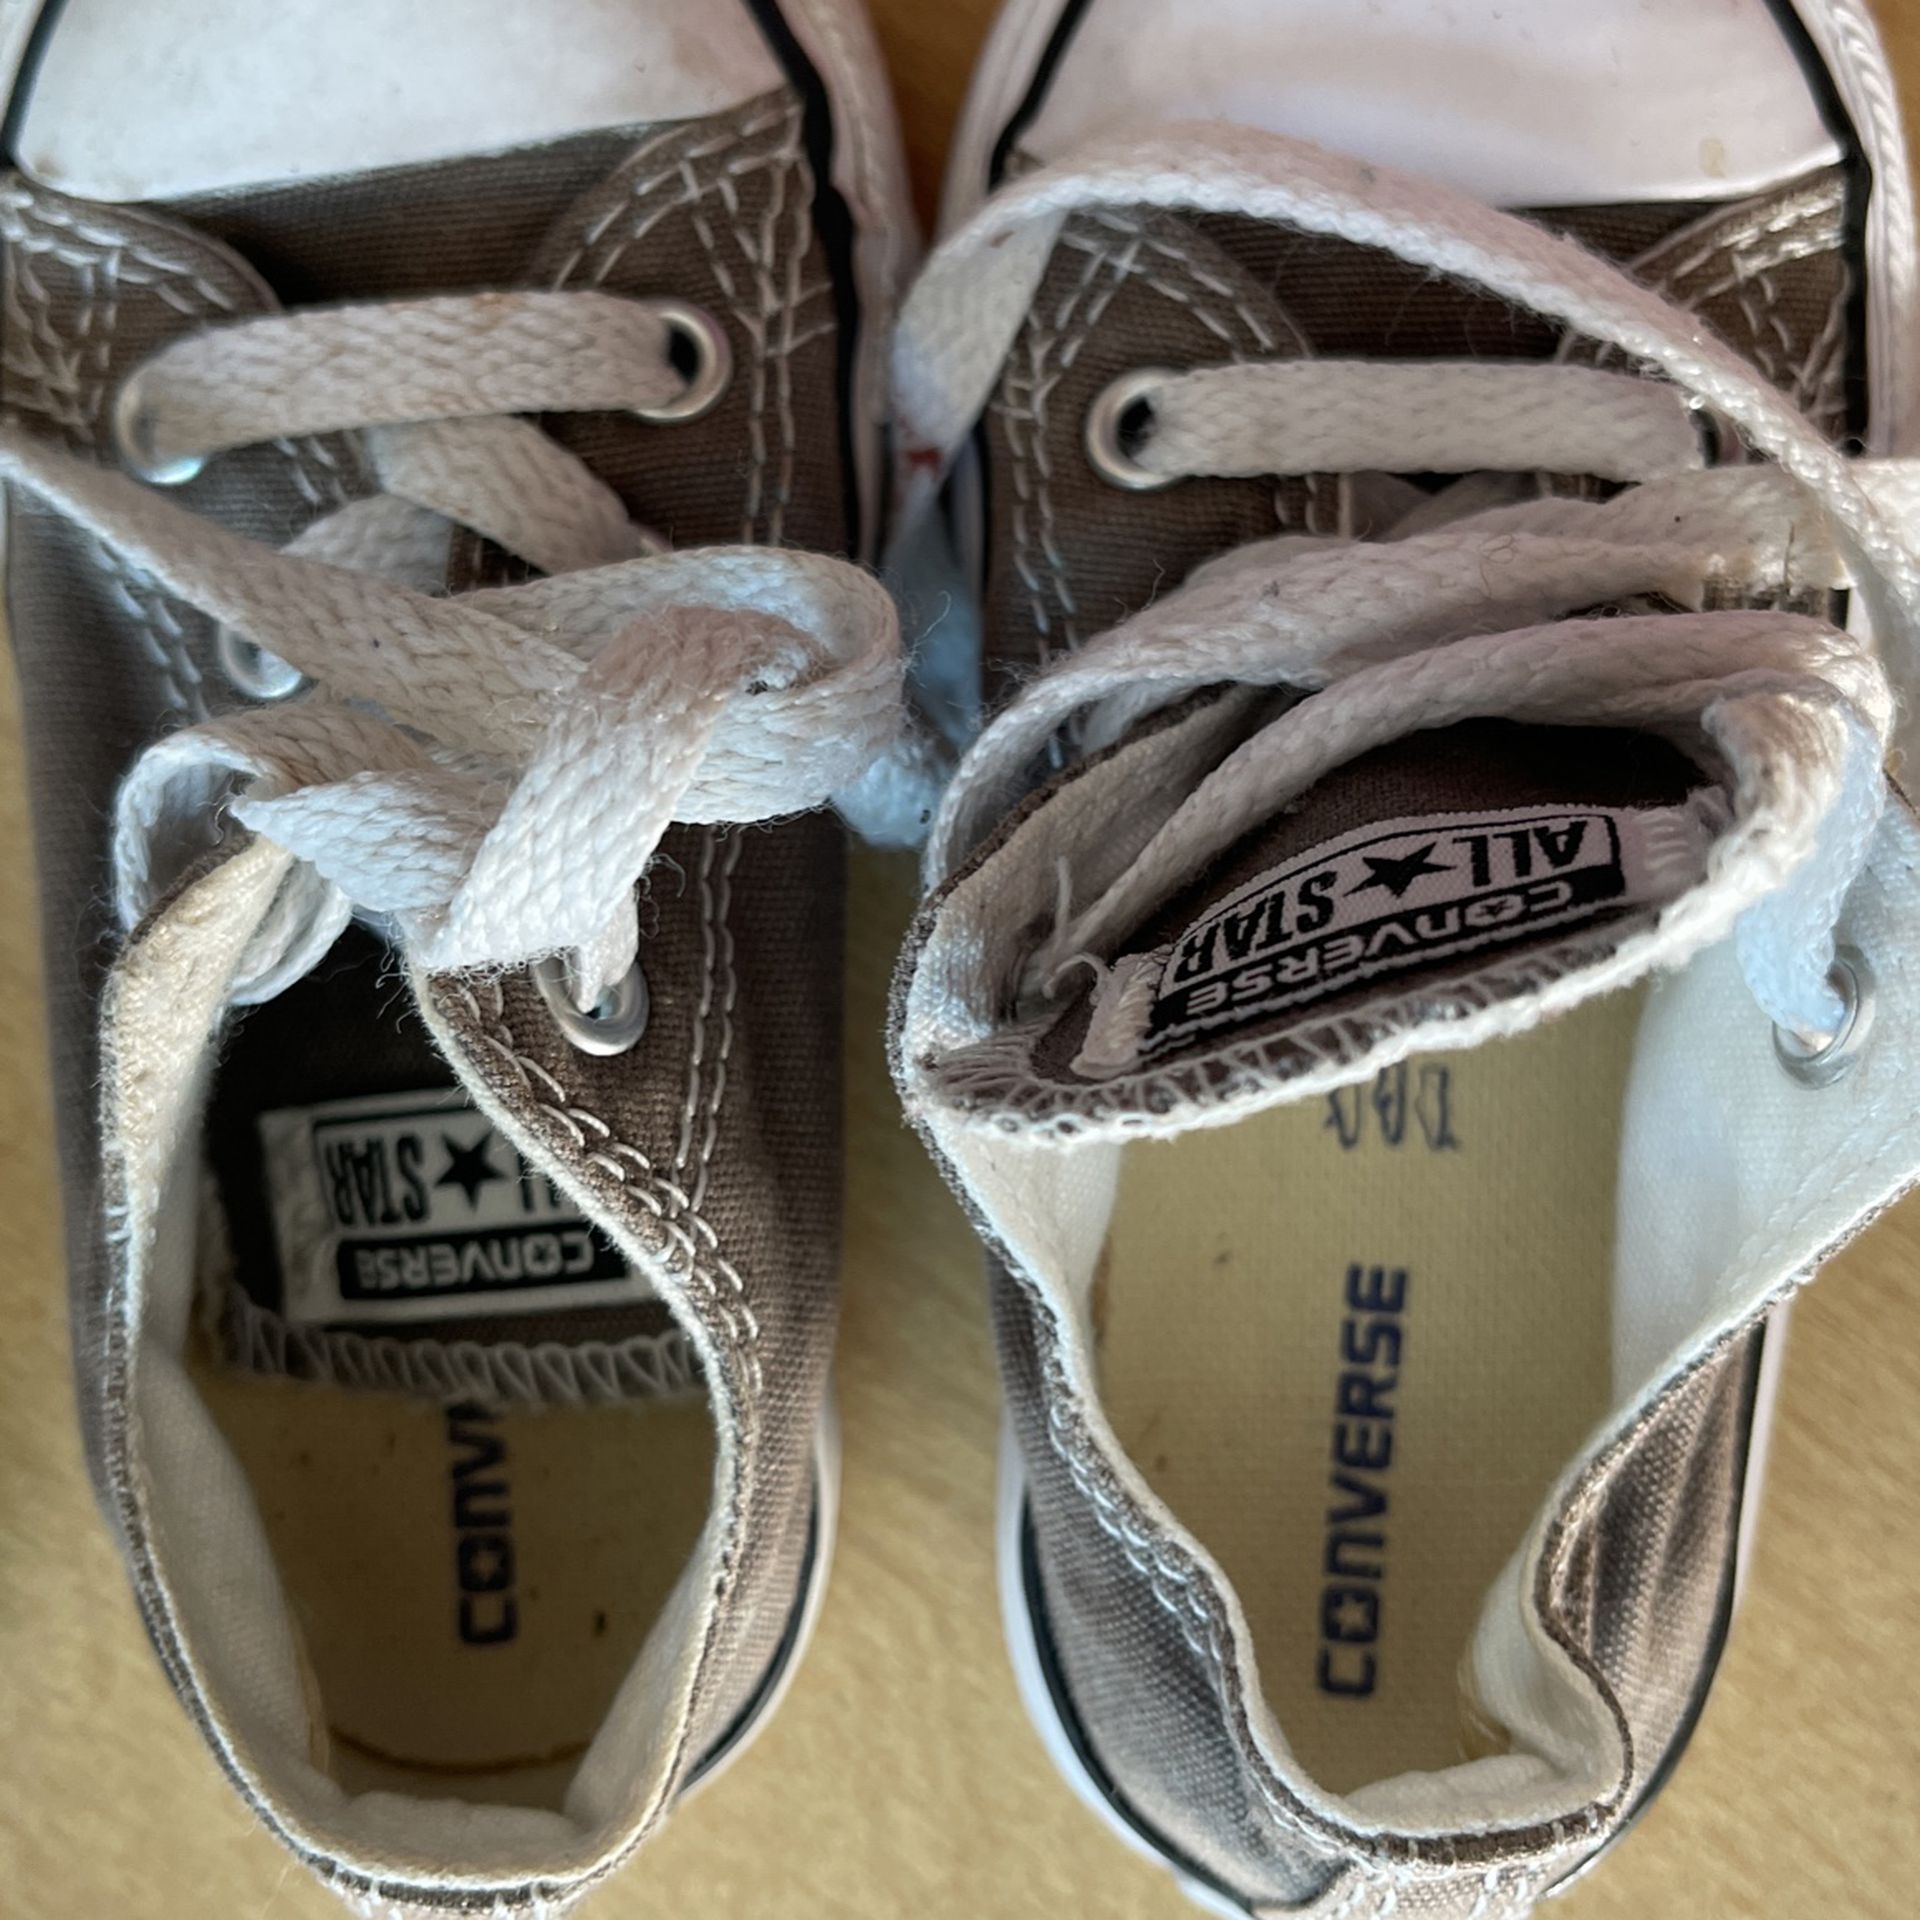 Baby Converse Tennis Shoes Size 6 